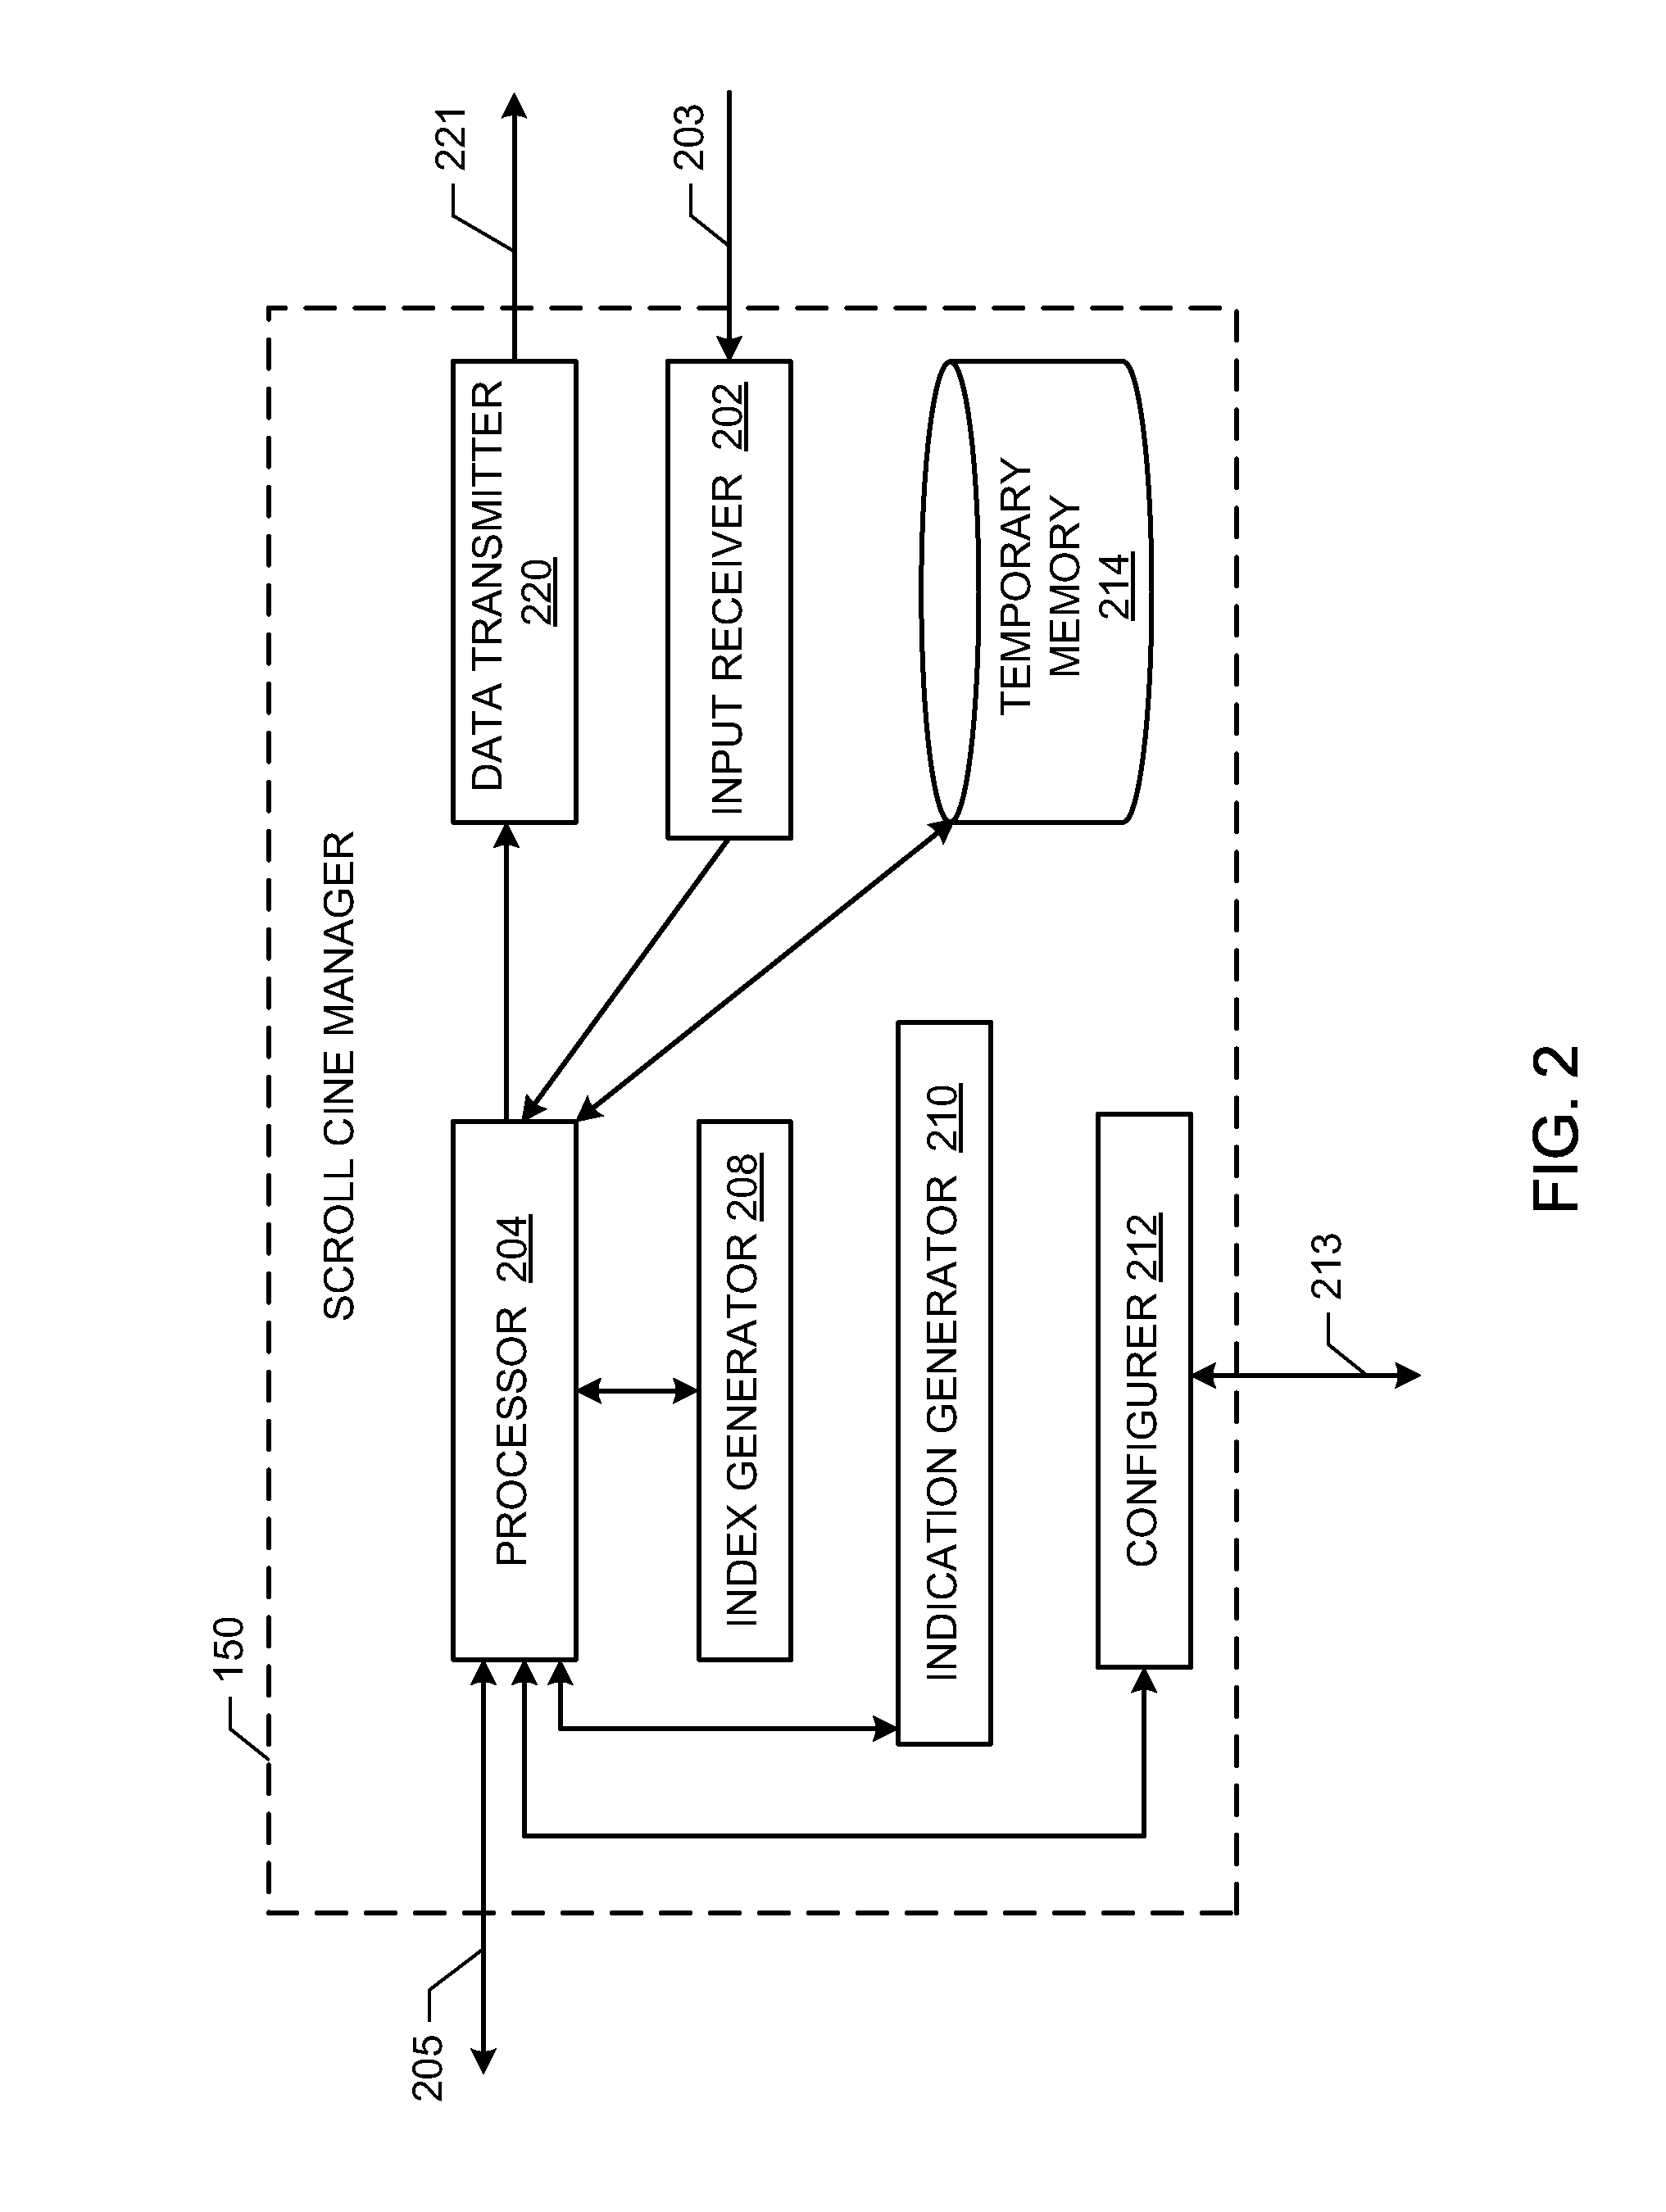 System and methods for indicating an image location in an image stack